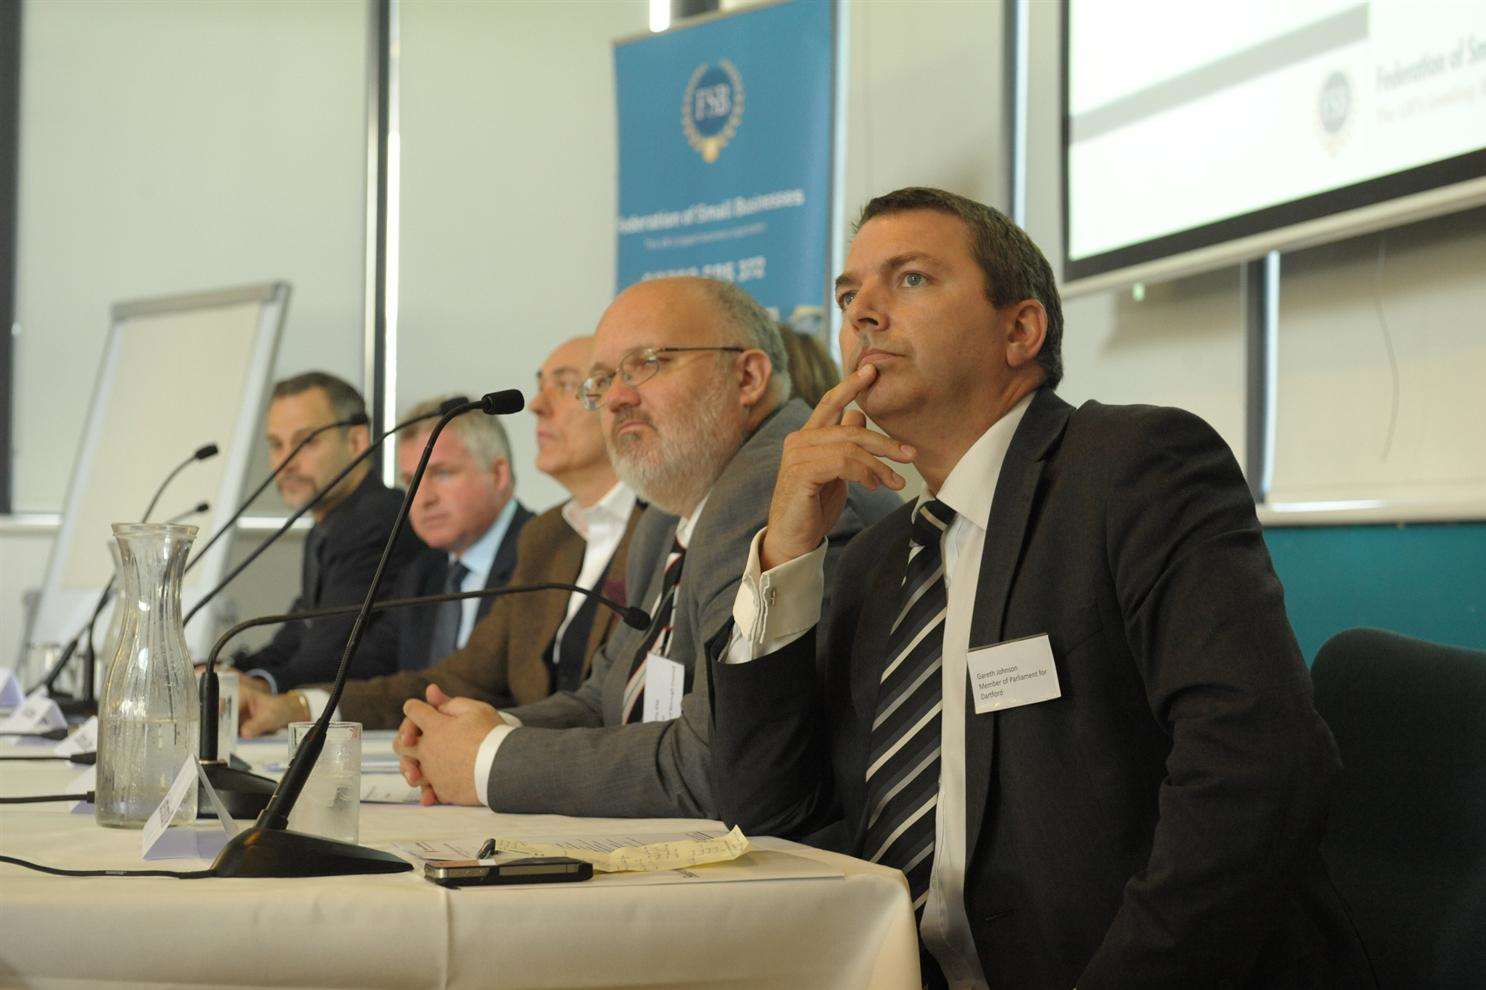 The panel at the FSB debate included Dartford MP Gareth Johnson and council leader Jeremy Kite